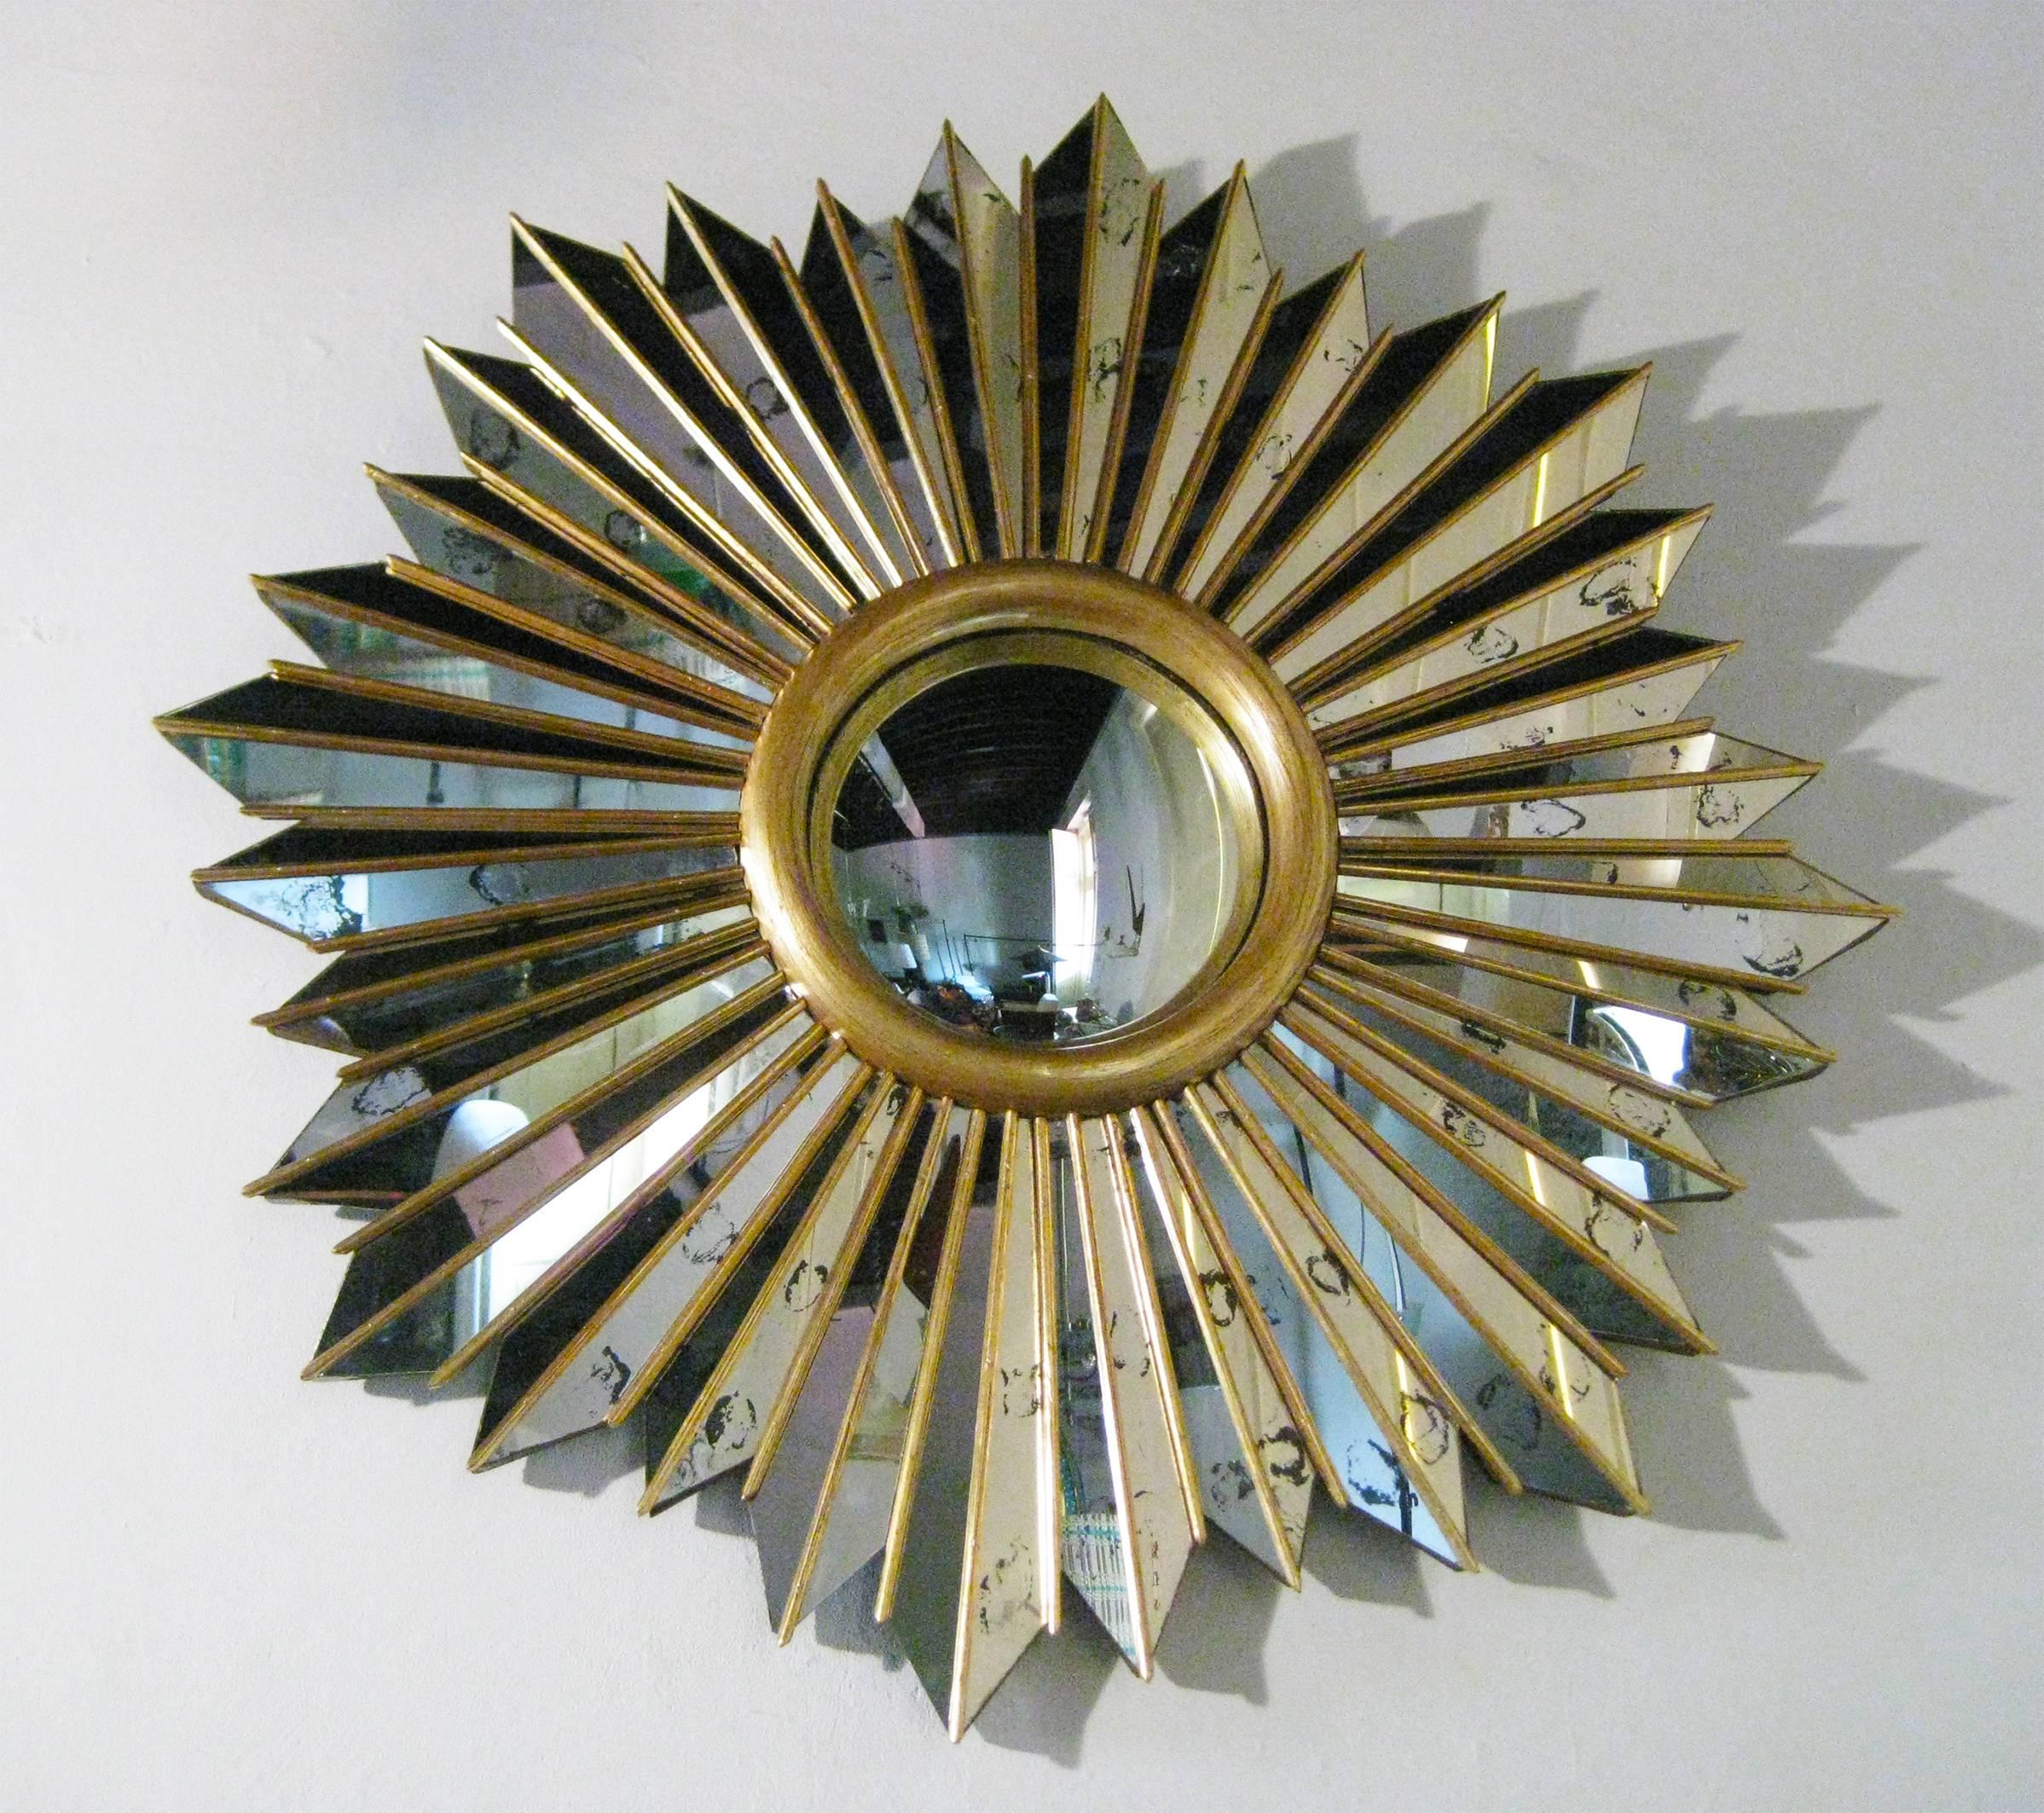 Spectacular and in perfect condition! The basic framing structure, of solid wood adorned in gold leaf, elaborately surrounds a convex mirror with intricately mirrored rays. Note that these rays are not flat; rather, they are joined at an angle,